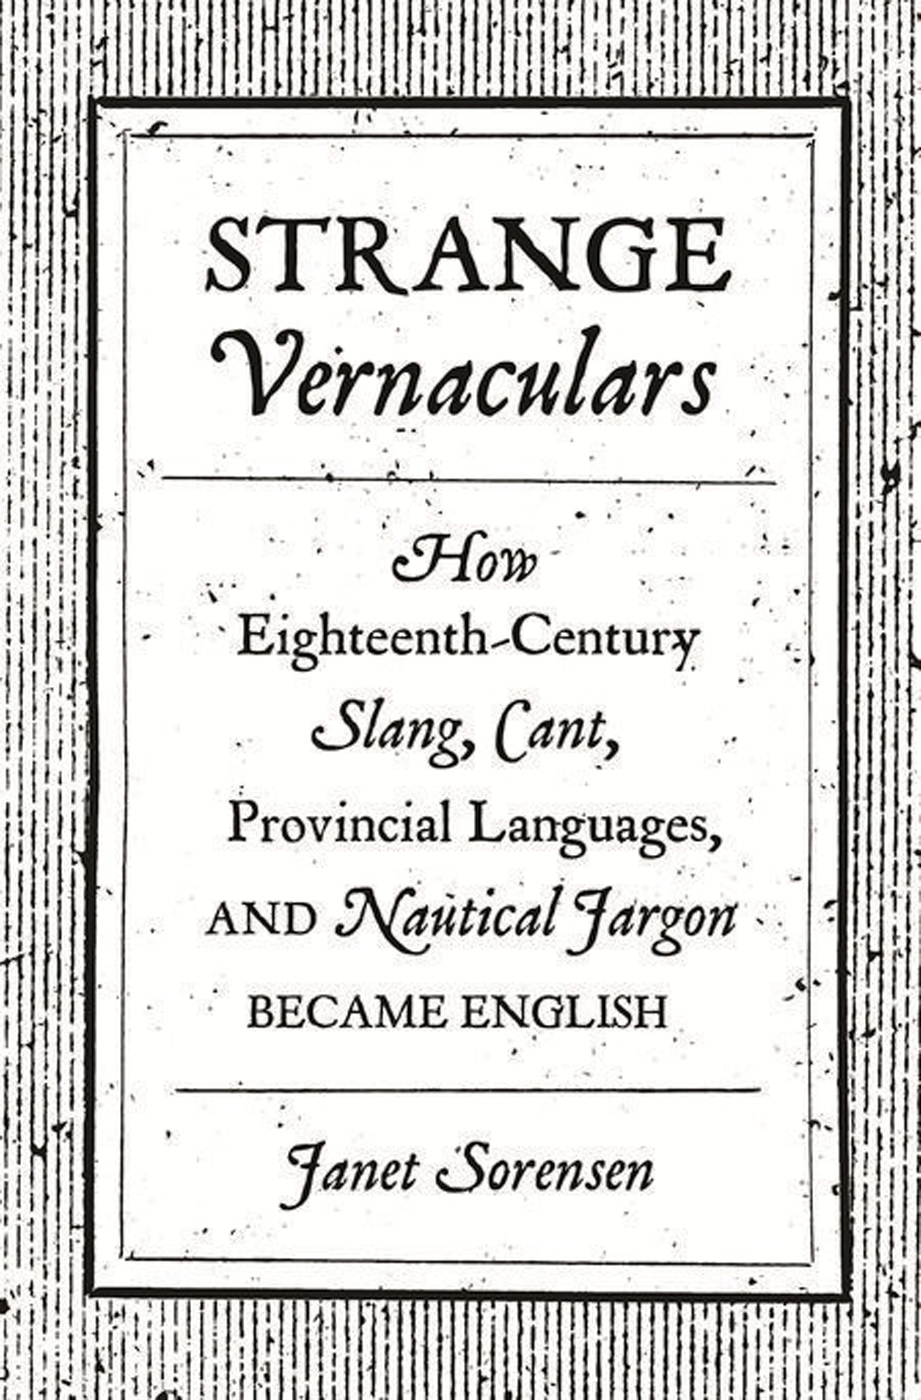 Strange Vernaculars How Eighteenth-Century Slang Cant Provincial Languages and Nautical Jargon Became English - image 1